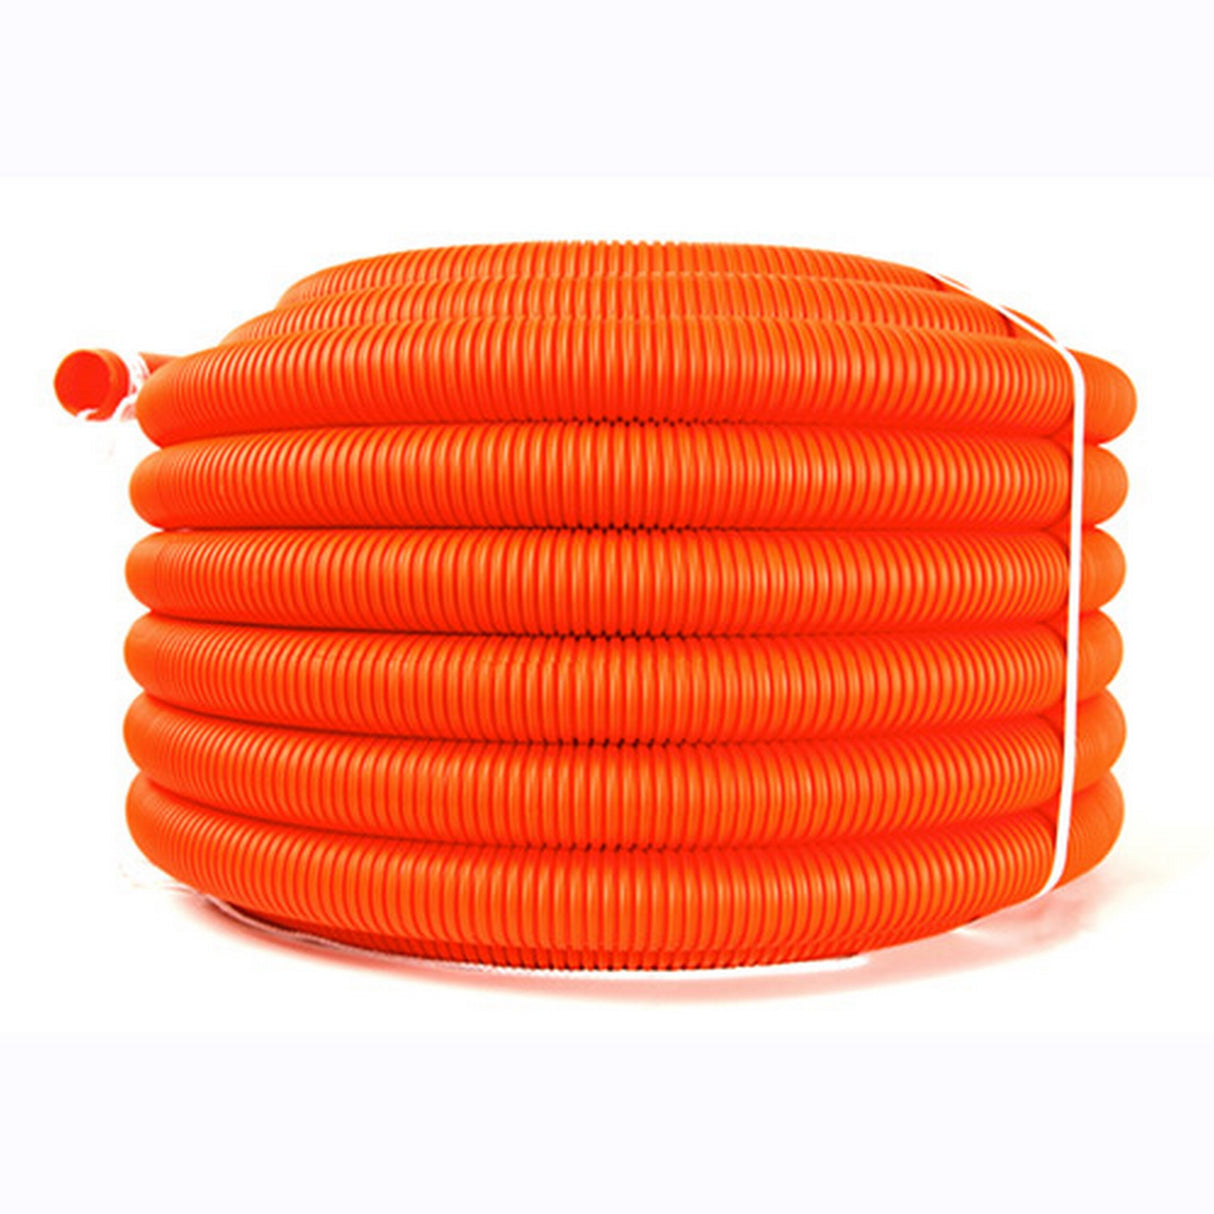 ICE Cable Systems 1.5-Inch Diameter PVC Conduit with Pull String, 250-Foot, Orange